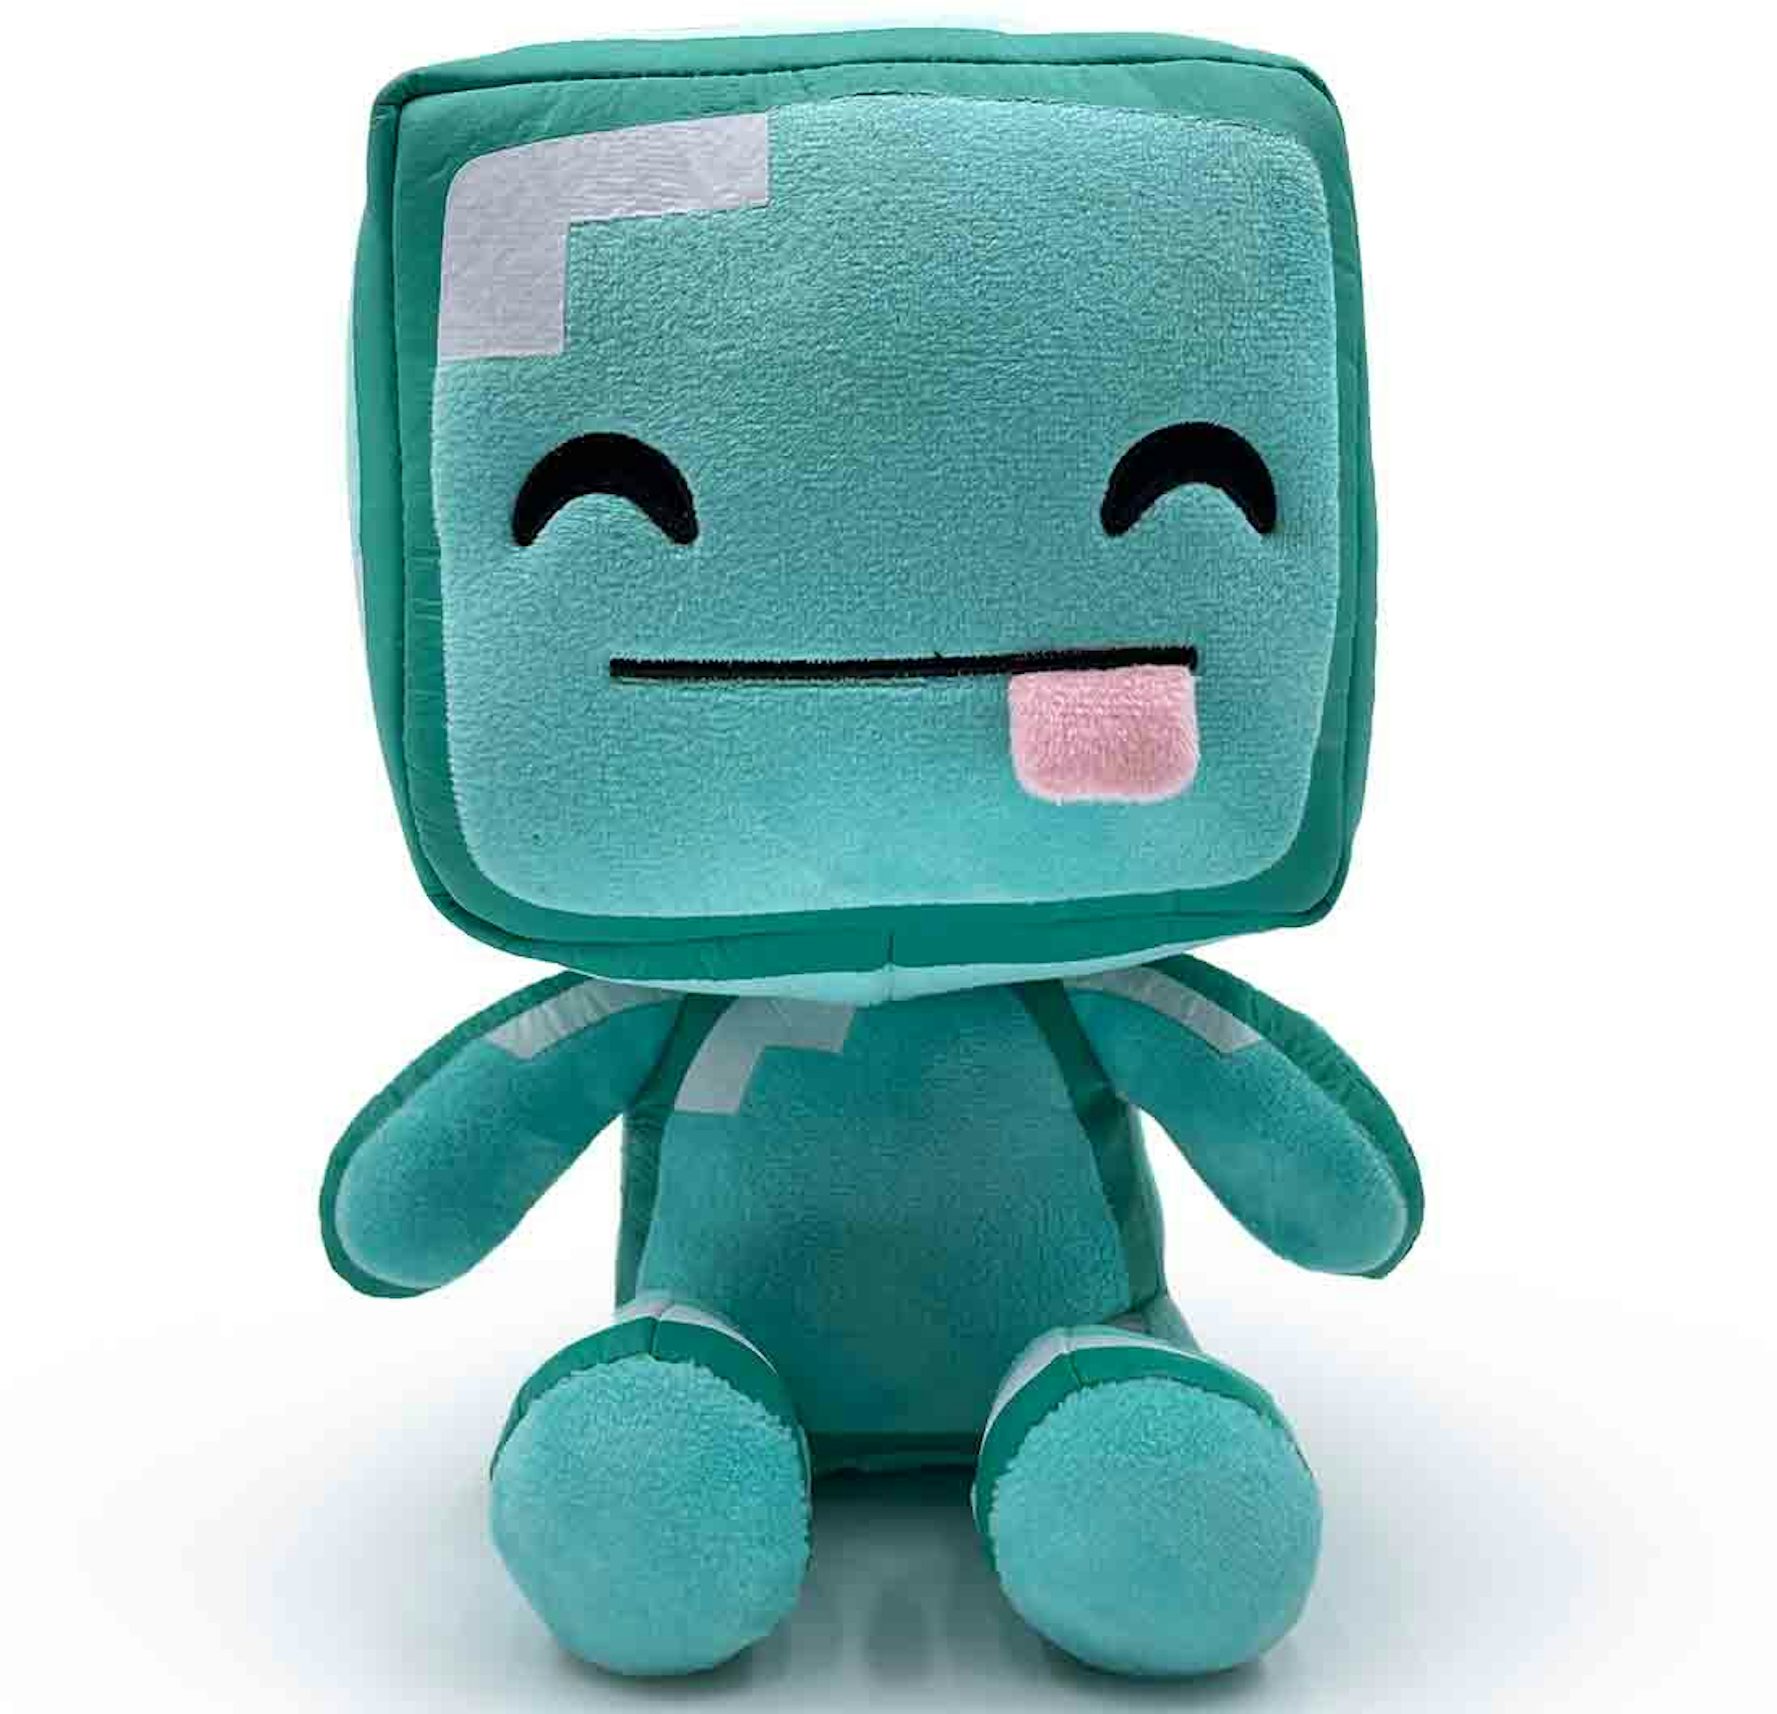 Creeper – Youtooz Collectibles